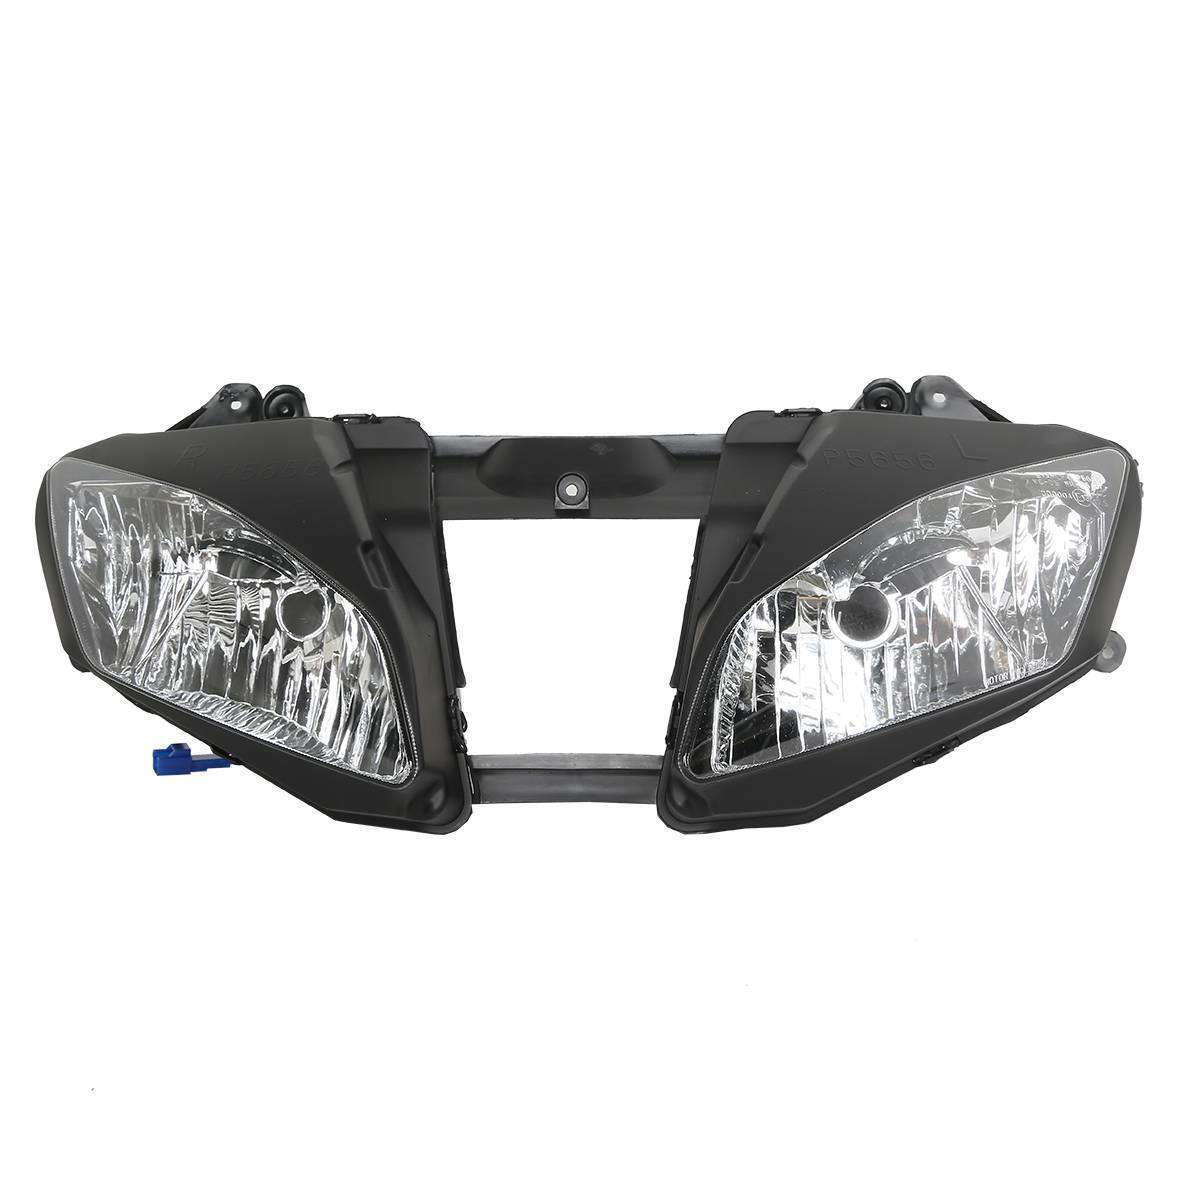 Front Headlight Assembly Fit For Yamaha YZFR6 YZF R6 2006-2007 2006 2007 Black